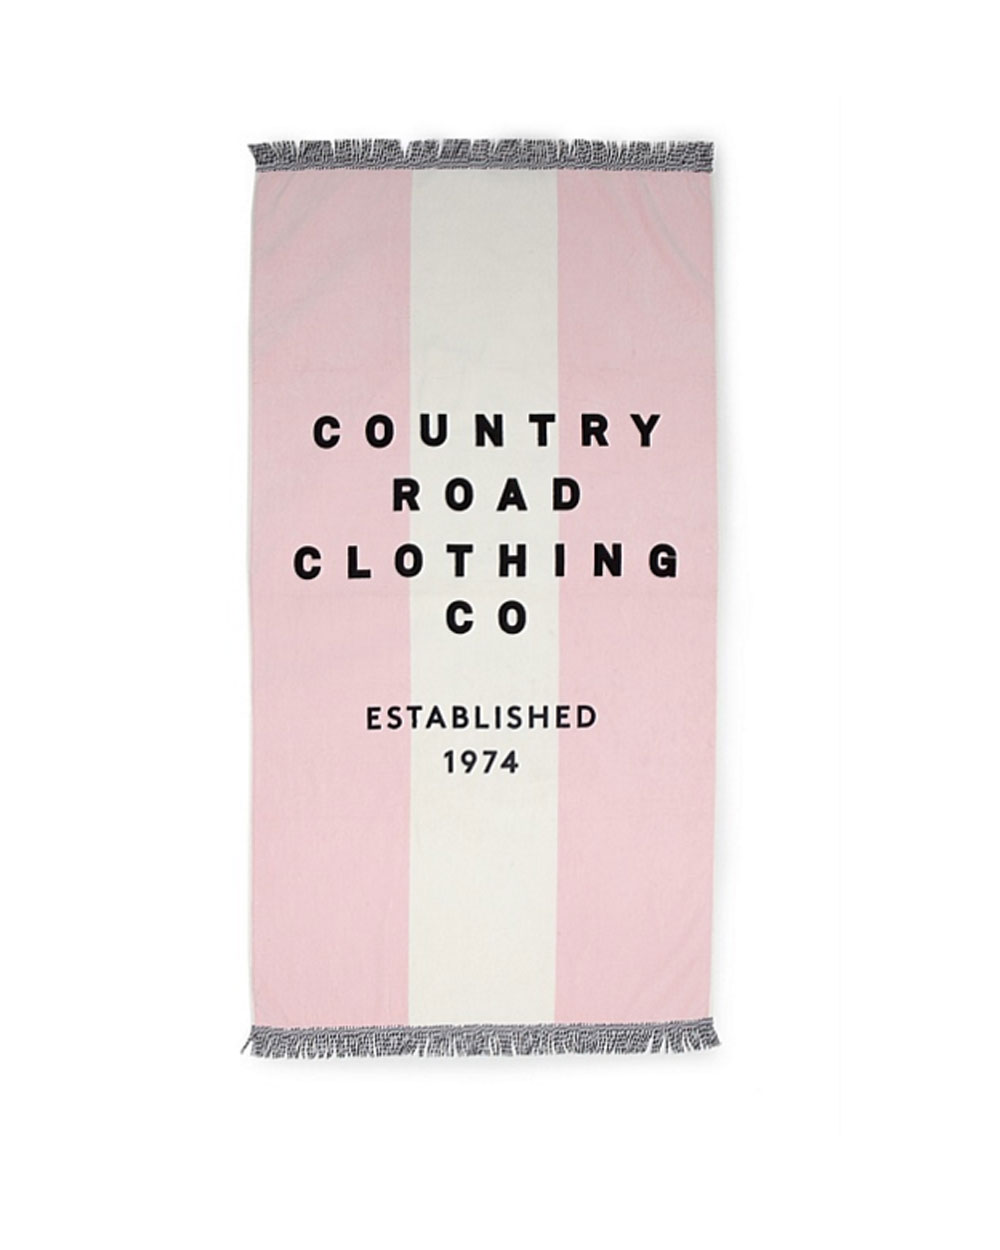 Country Road towel, $74.95